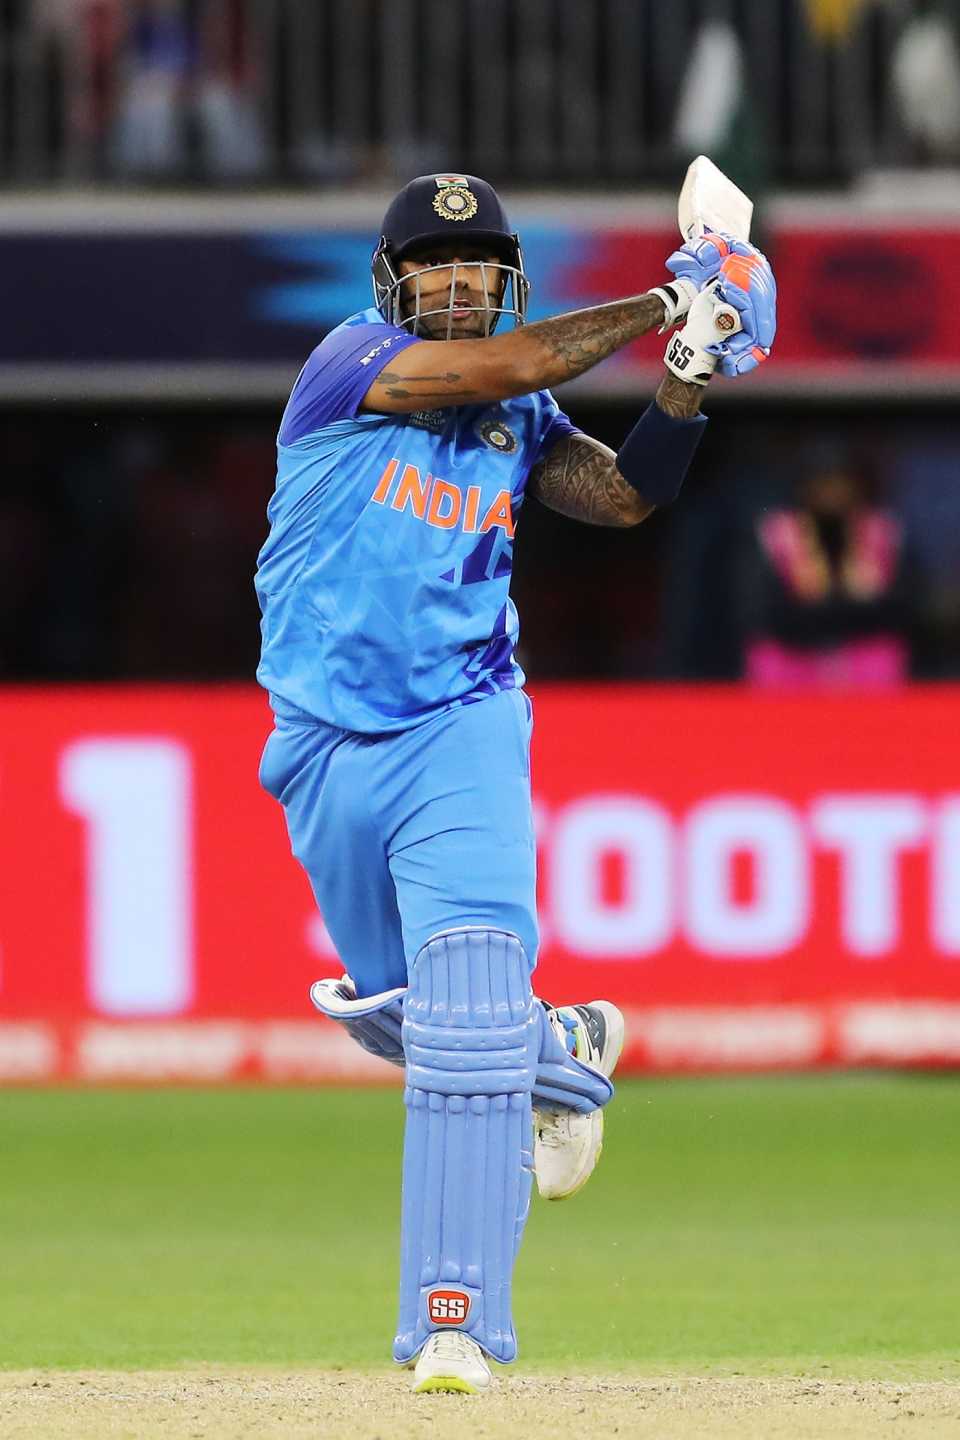 Suryakumar Yadav finds a way to attack any kind of length, India vs South Africa, Perth, T20 World Cup 2022, October 30, 2022